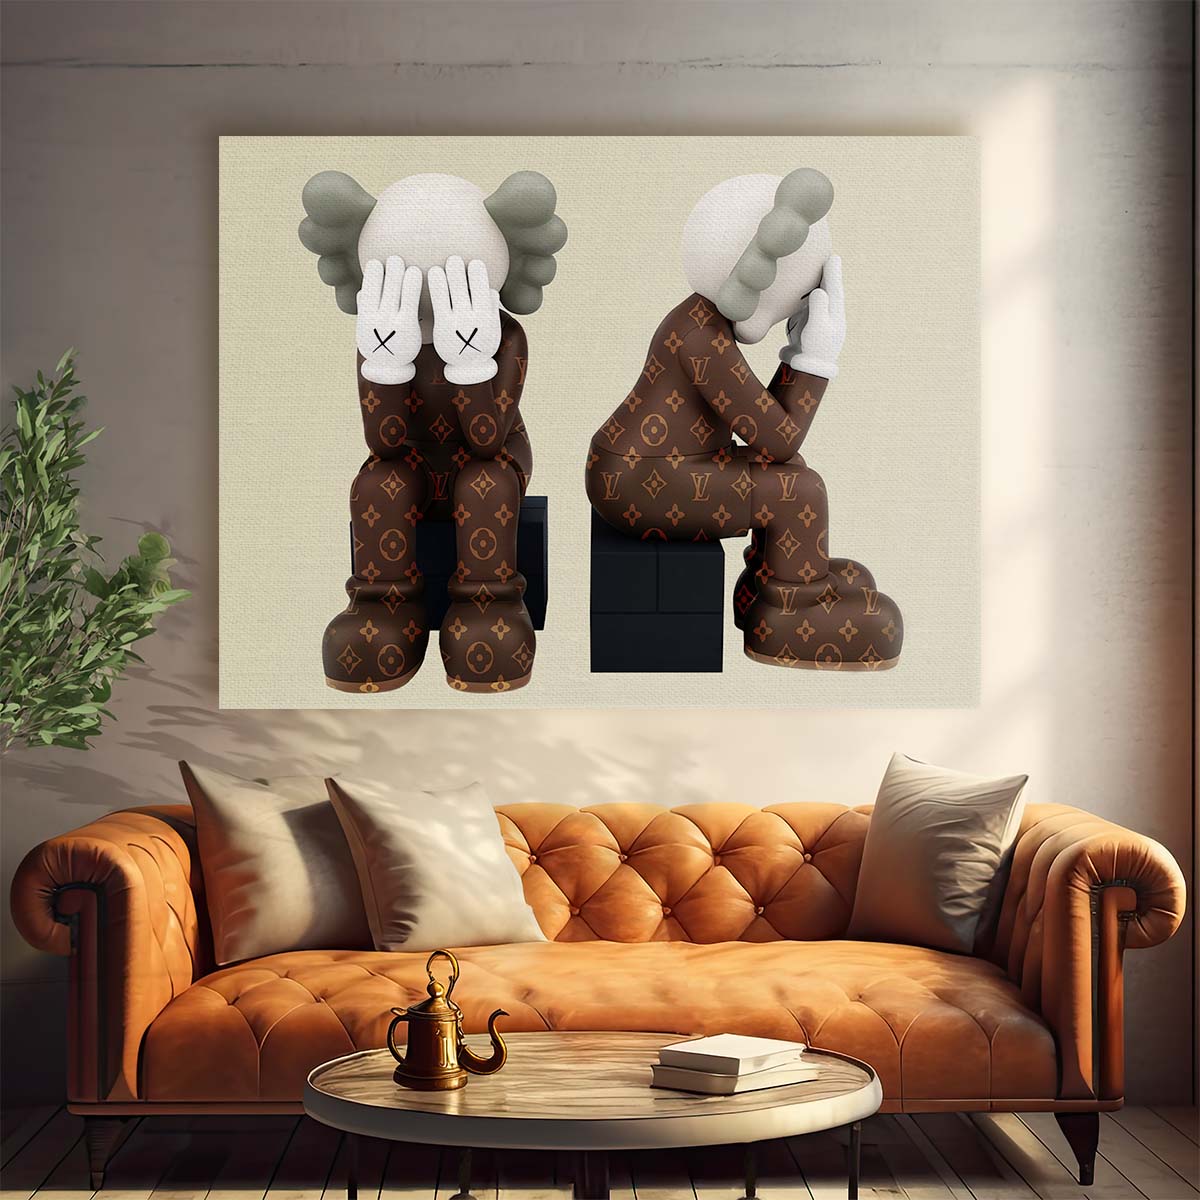 Kaws in Louis Vuitton Skin Wall Art by Luxuriance Designs. Made in USA.